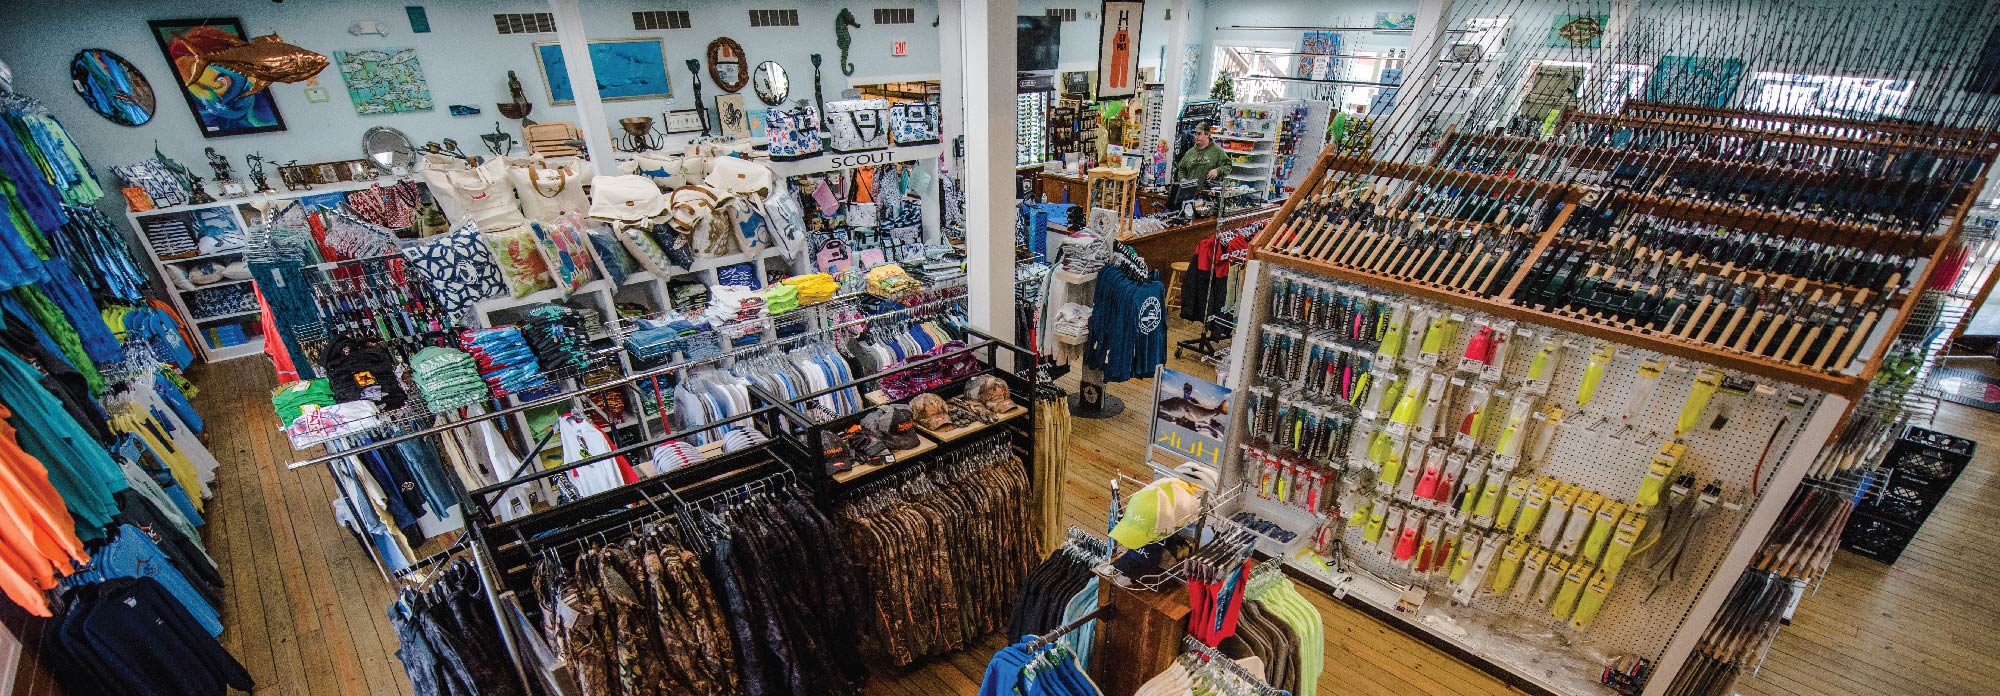 Inside view of Atlantic Tackle's store in West Ocean City, MD